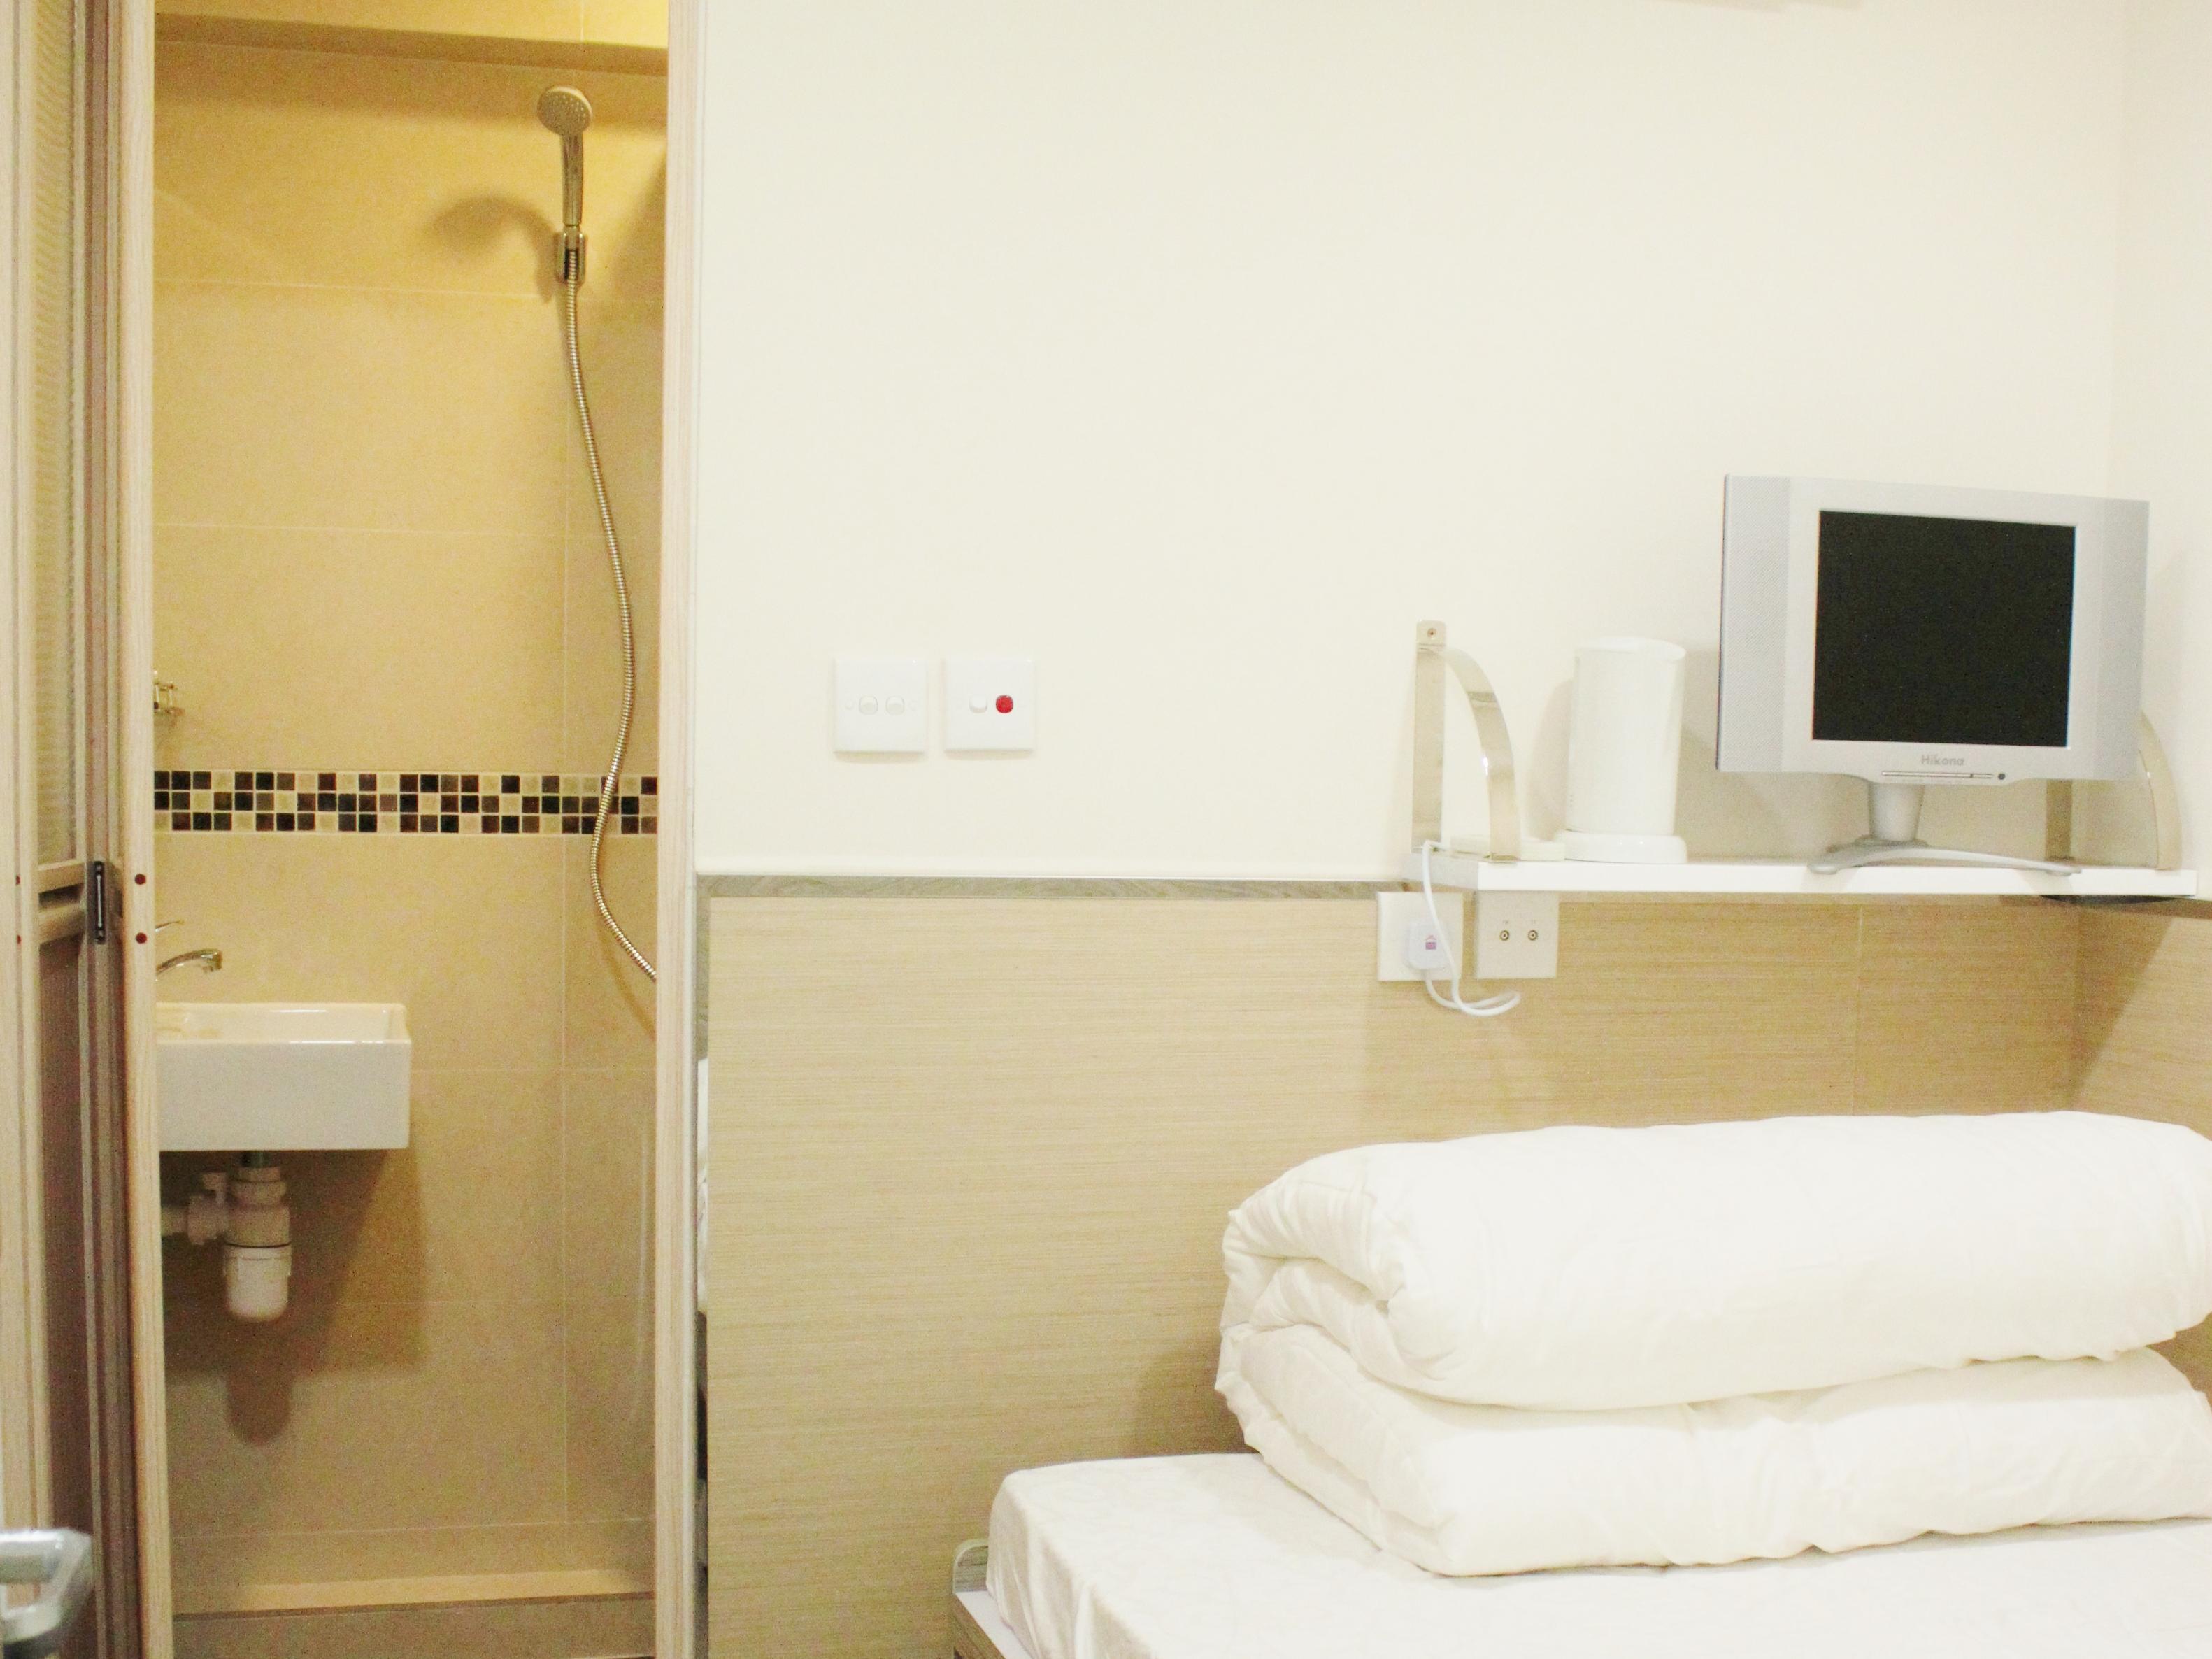 Motel Double Yield Hong Kong FAQ 2016, What facilities are there in Motel Double Yield Hong Kong 2016, What Languages Spoken are Supported in Motel Double Yield Hong Kong 2016, Which payment cards are accepted in Motel Double Yield Hong Kong , Hong Kong Motel Double Yield room facilities and services Q&A 2016, Hong Kong Motel Double Yield online booking services 2016, Hong Kong Motel Double Yield address 2016, Hong Kong Motel Double Yield telephone number 2016,Hong Kong Motel Double Yield map 2016, Hong Kong Motel Double Yield traffic guide 2016, how to go Hong Kong Motel Double Yield, Hong Kong Motel Double Yield booking online 2016, Hong Kong Motel Double Yield room types 2016.